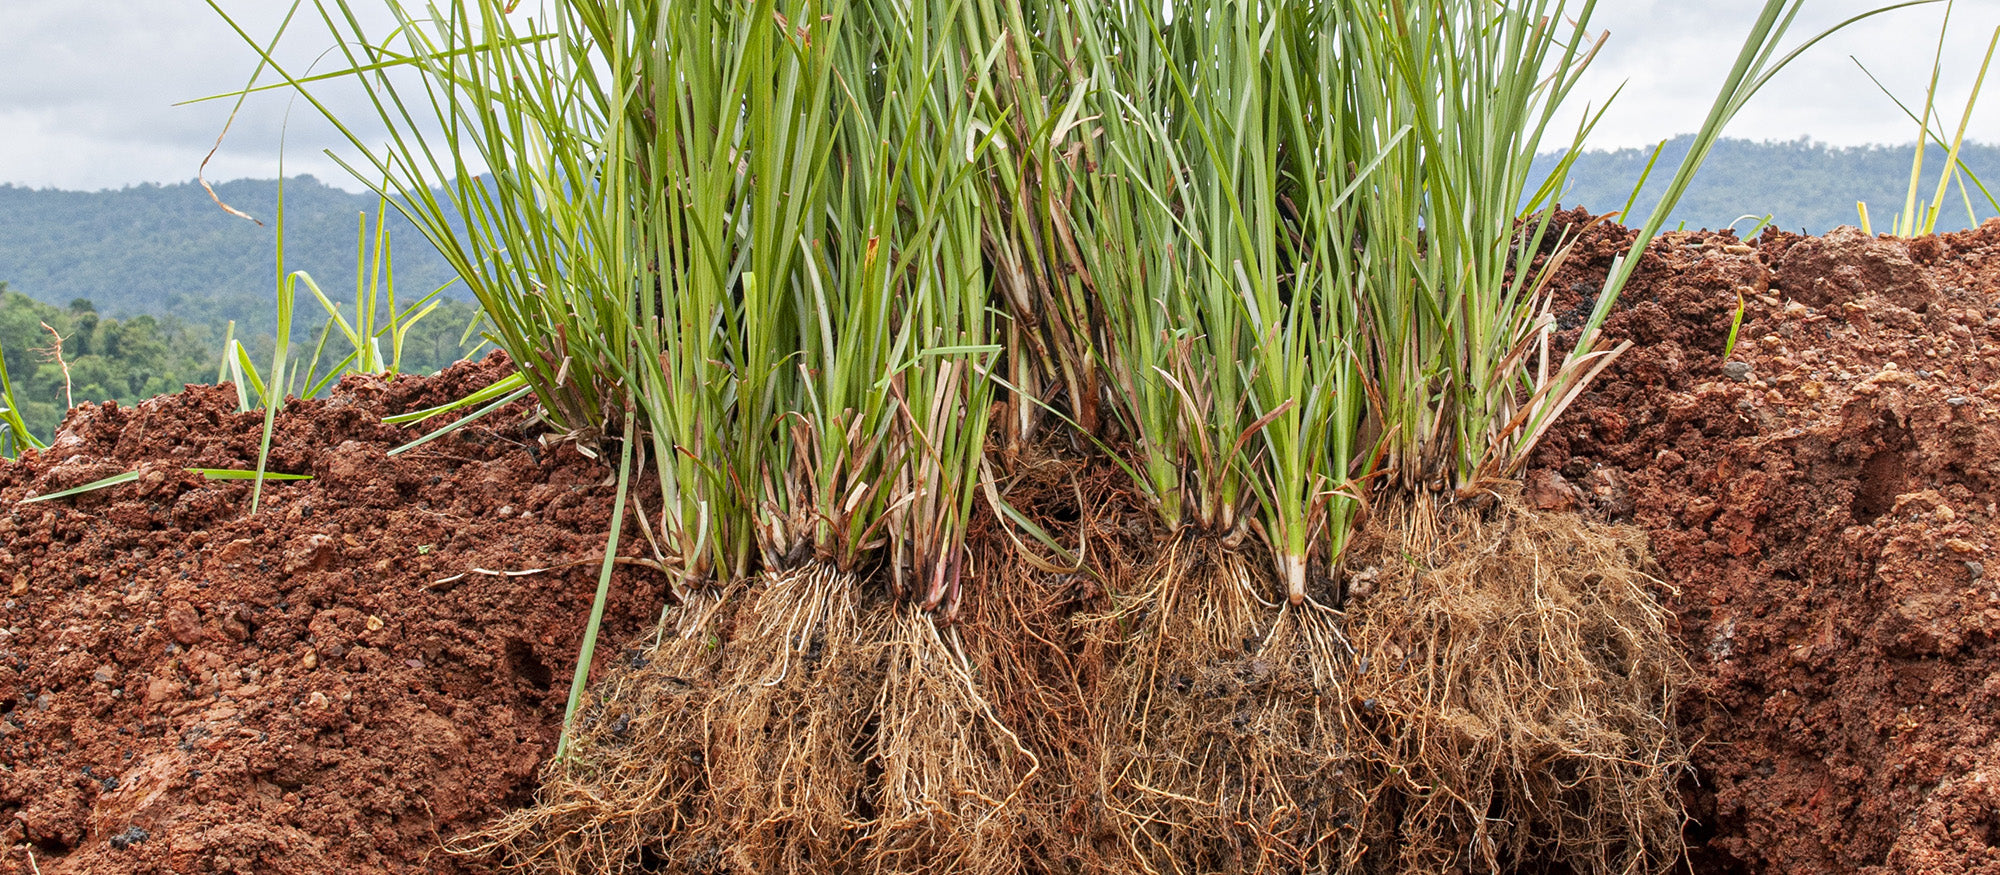 Vetiver roots in dirt before distilled into essential oil